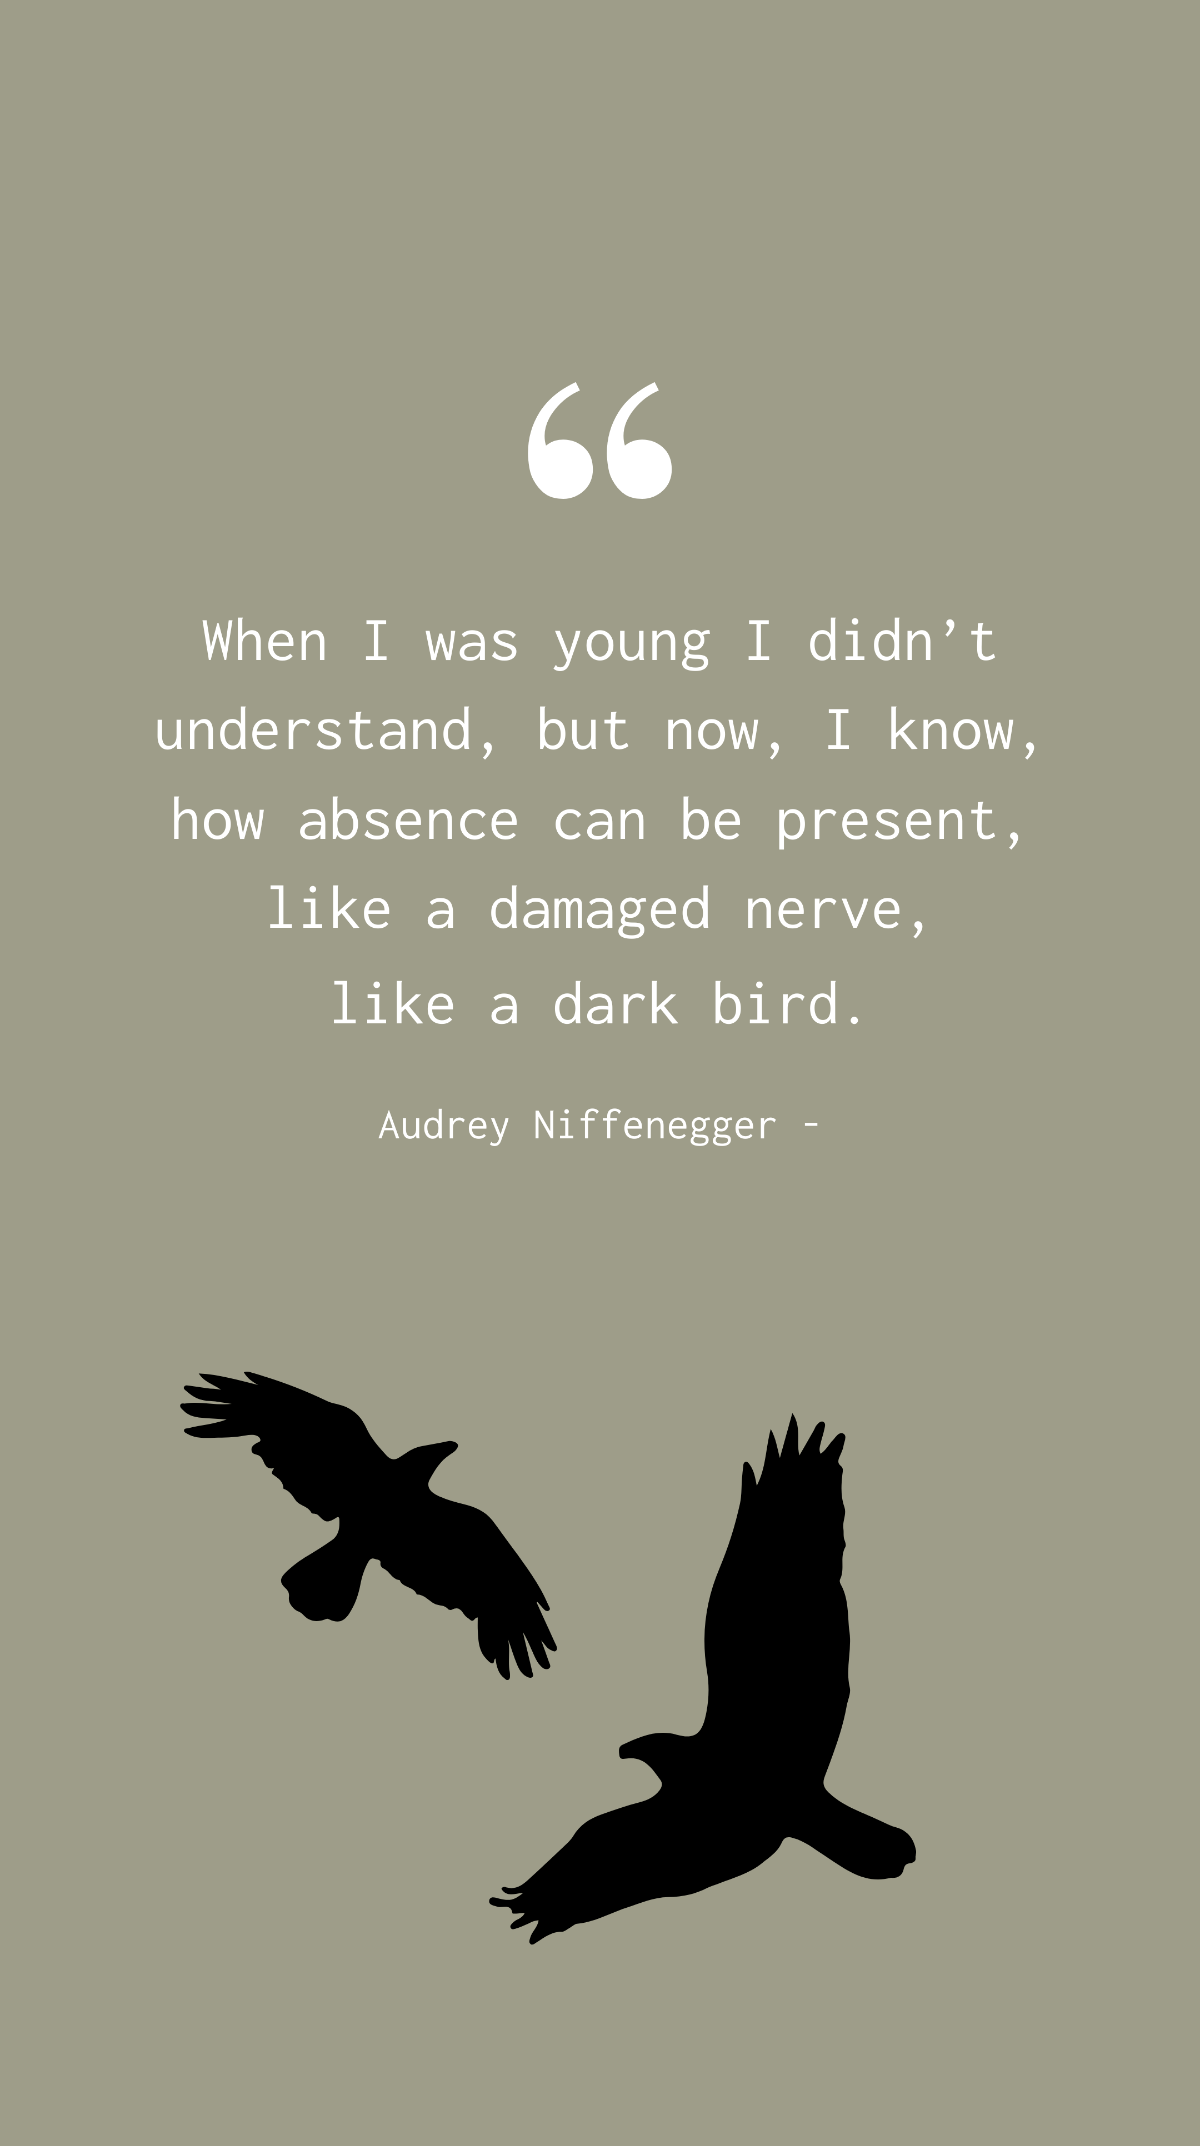 Audrey Niffenegger - When I was young I didn’t understand, but now, I know, how absence can be present, like a damaged nerve, like a dark bird. Template